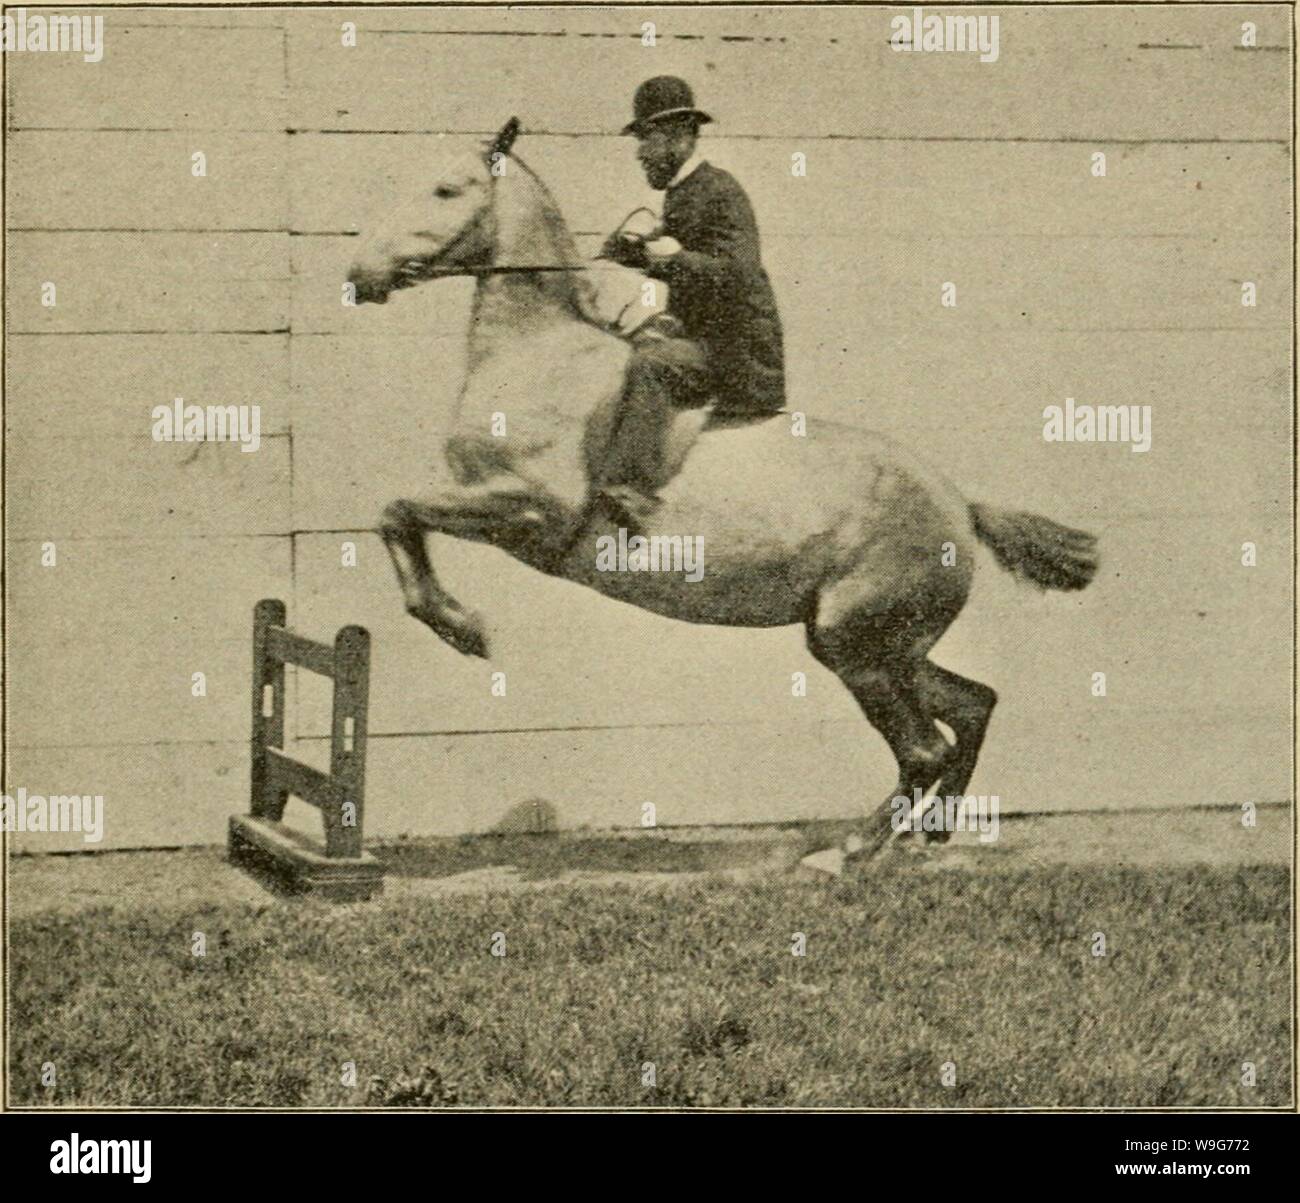 Archive image from page 128 of Curb, snaffle, and spur . Curb, snaffle, and spur : a method of training young horses for the cavalry service, and for general use under the saddle  curbsnafflespurm00ande Year: 1894 ( Jumping, 123 impede the horse in its efforts to land safely, and yet if the horse seeks some support it must find it. Should the horse ever refuse a leap, or get into the habit of jumping carelessly, it should be    THE FIRST LEAP OF A YOUNG HORSE, put back to the early lessons. But it will be the fault of the rider if a horse once properly trained ever becomes disorderly in leapin Stock Photo